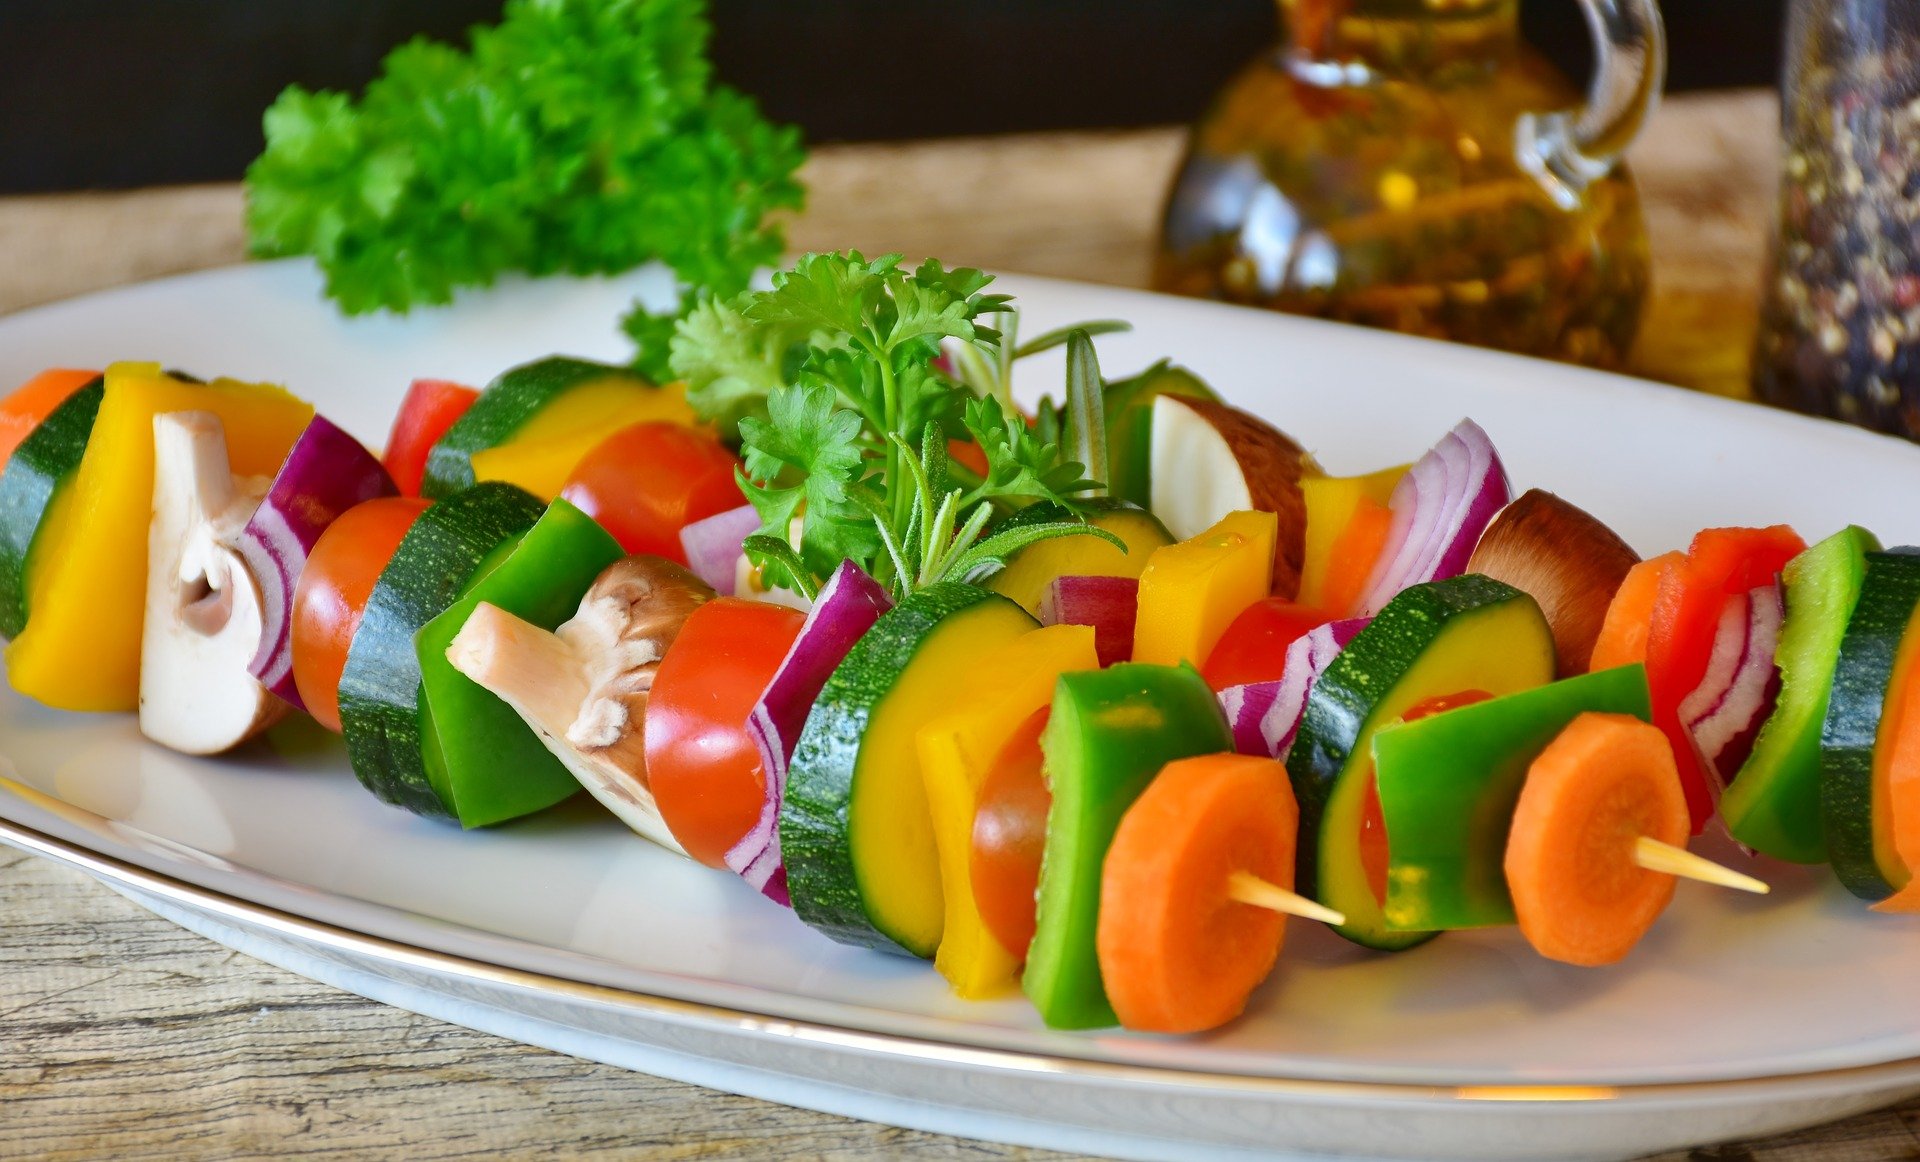 Kabobs of bright vegetables